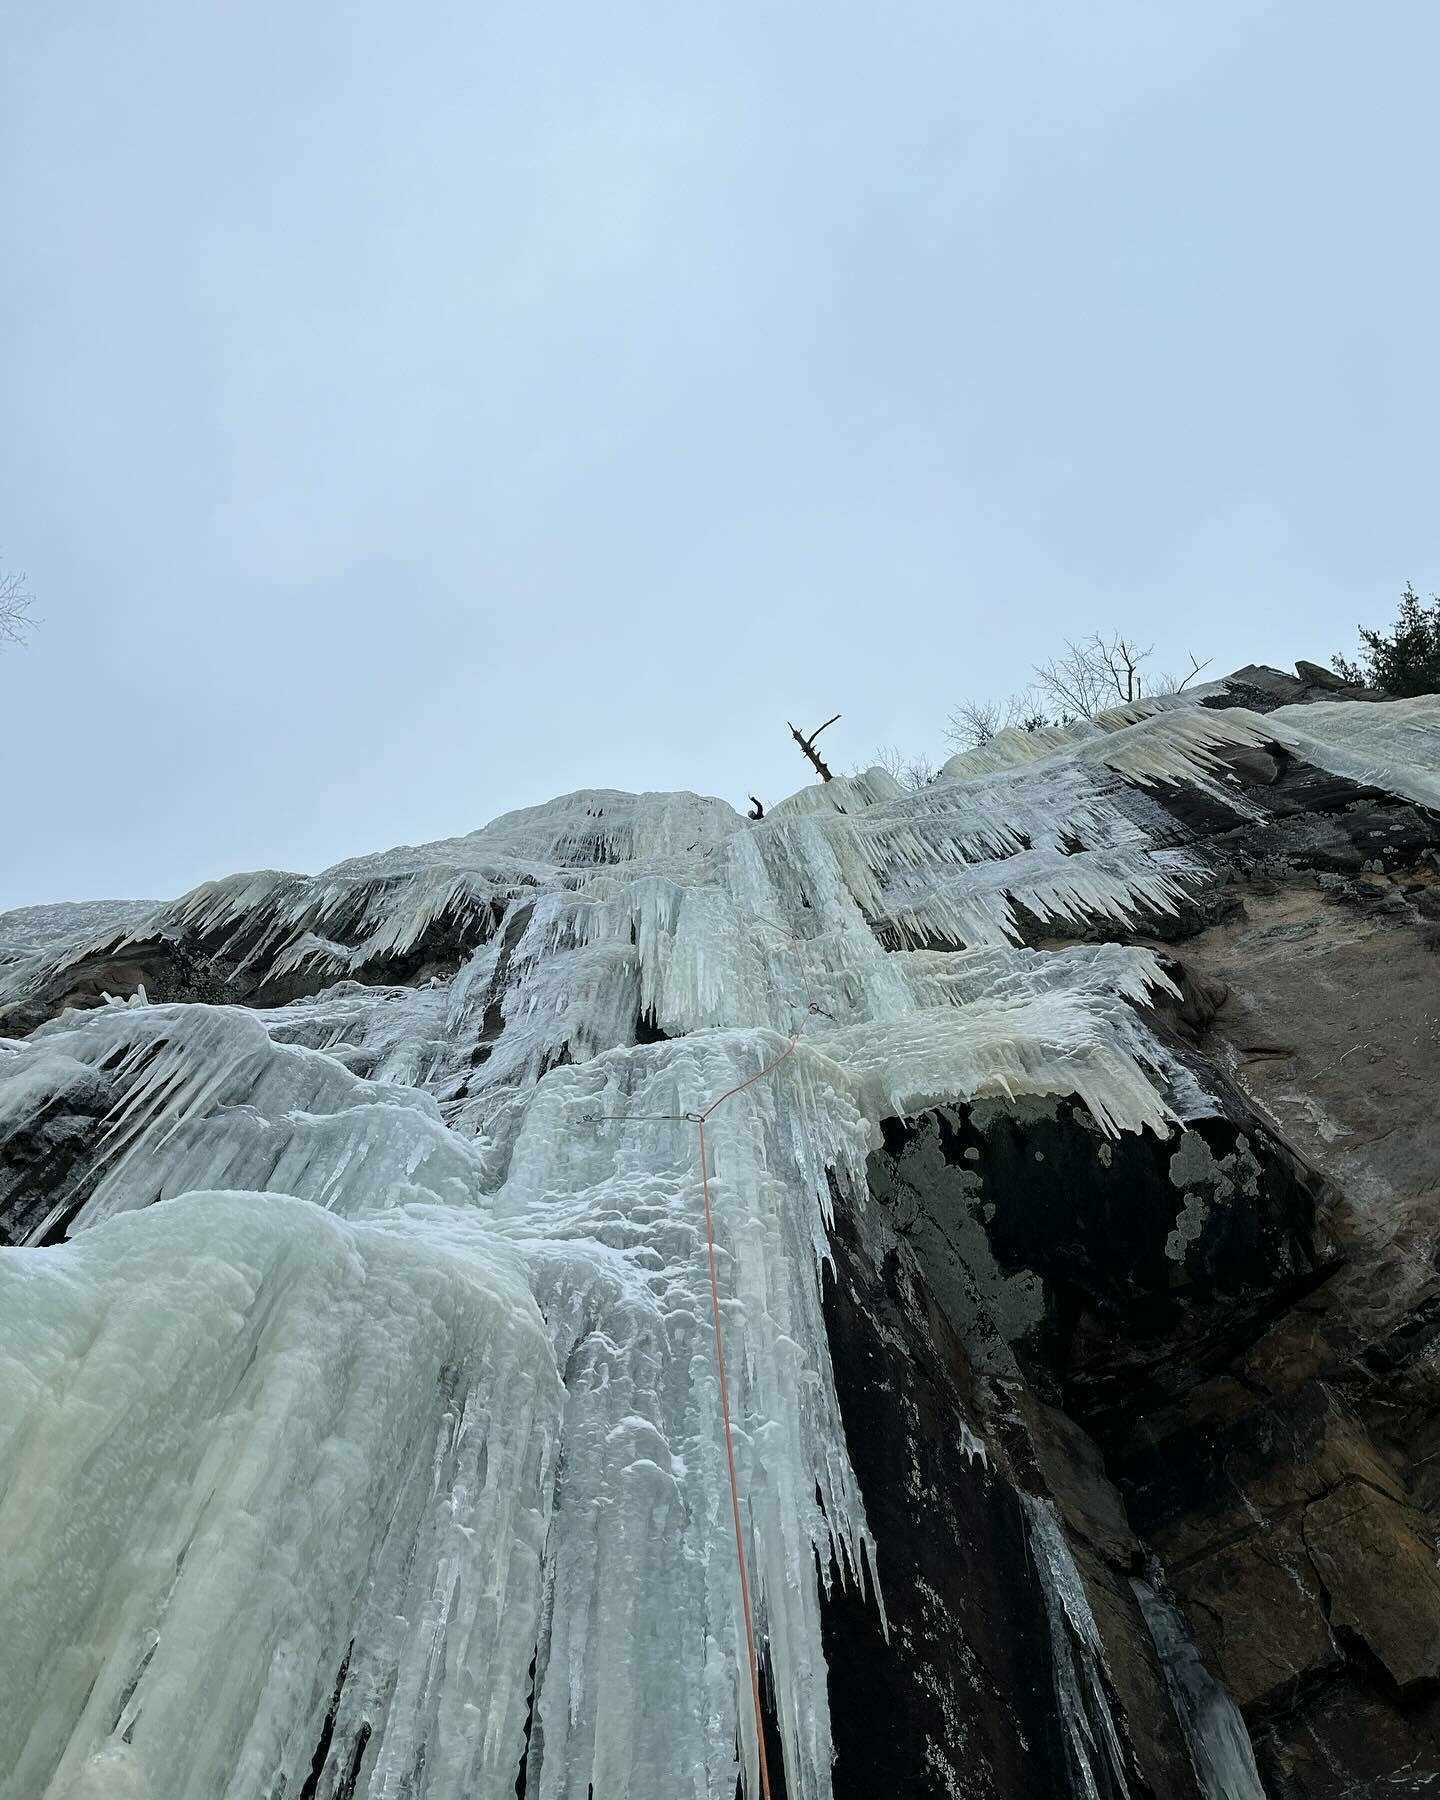 A person ice climbing a frozen waterfall with climbing ropes, against an overcast sky.